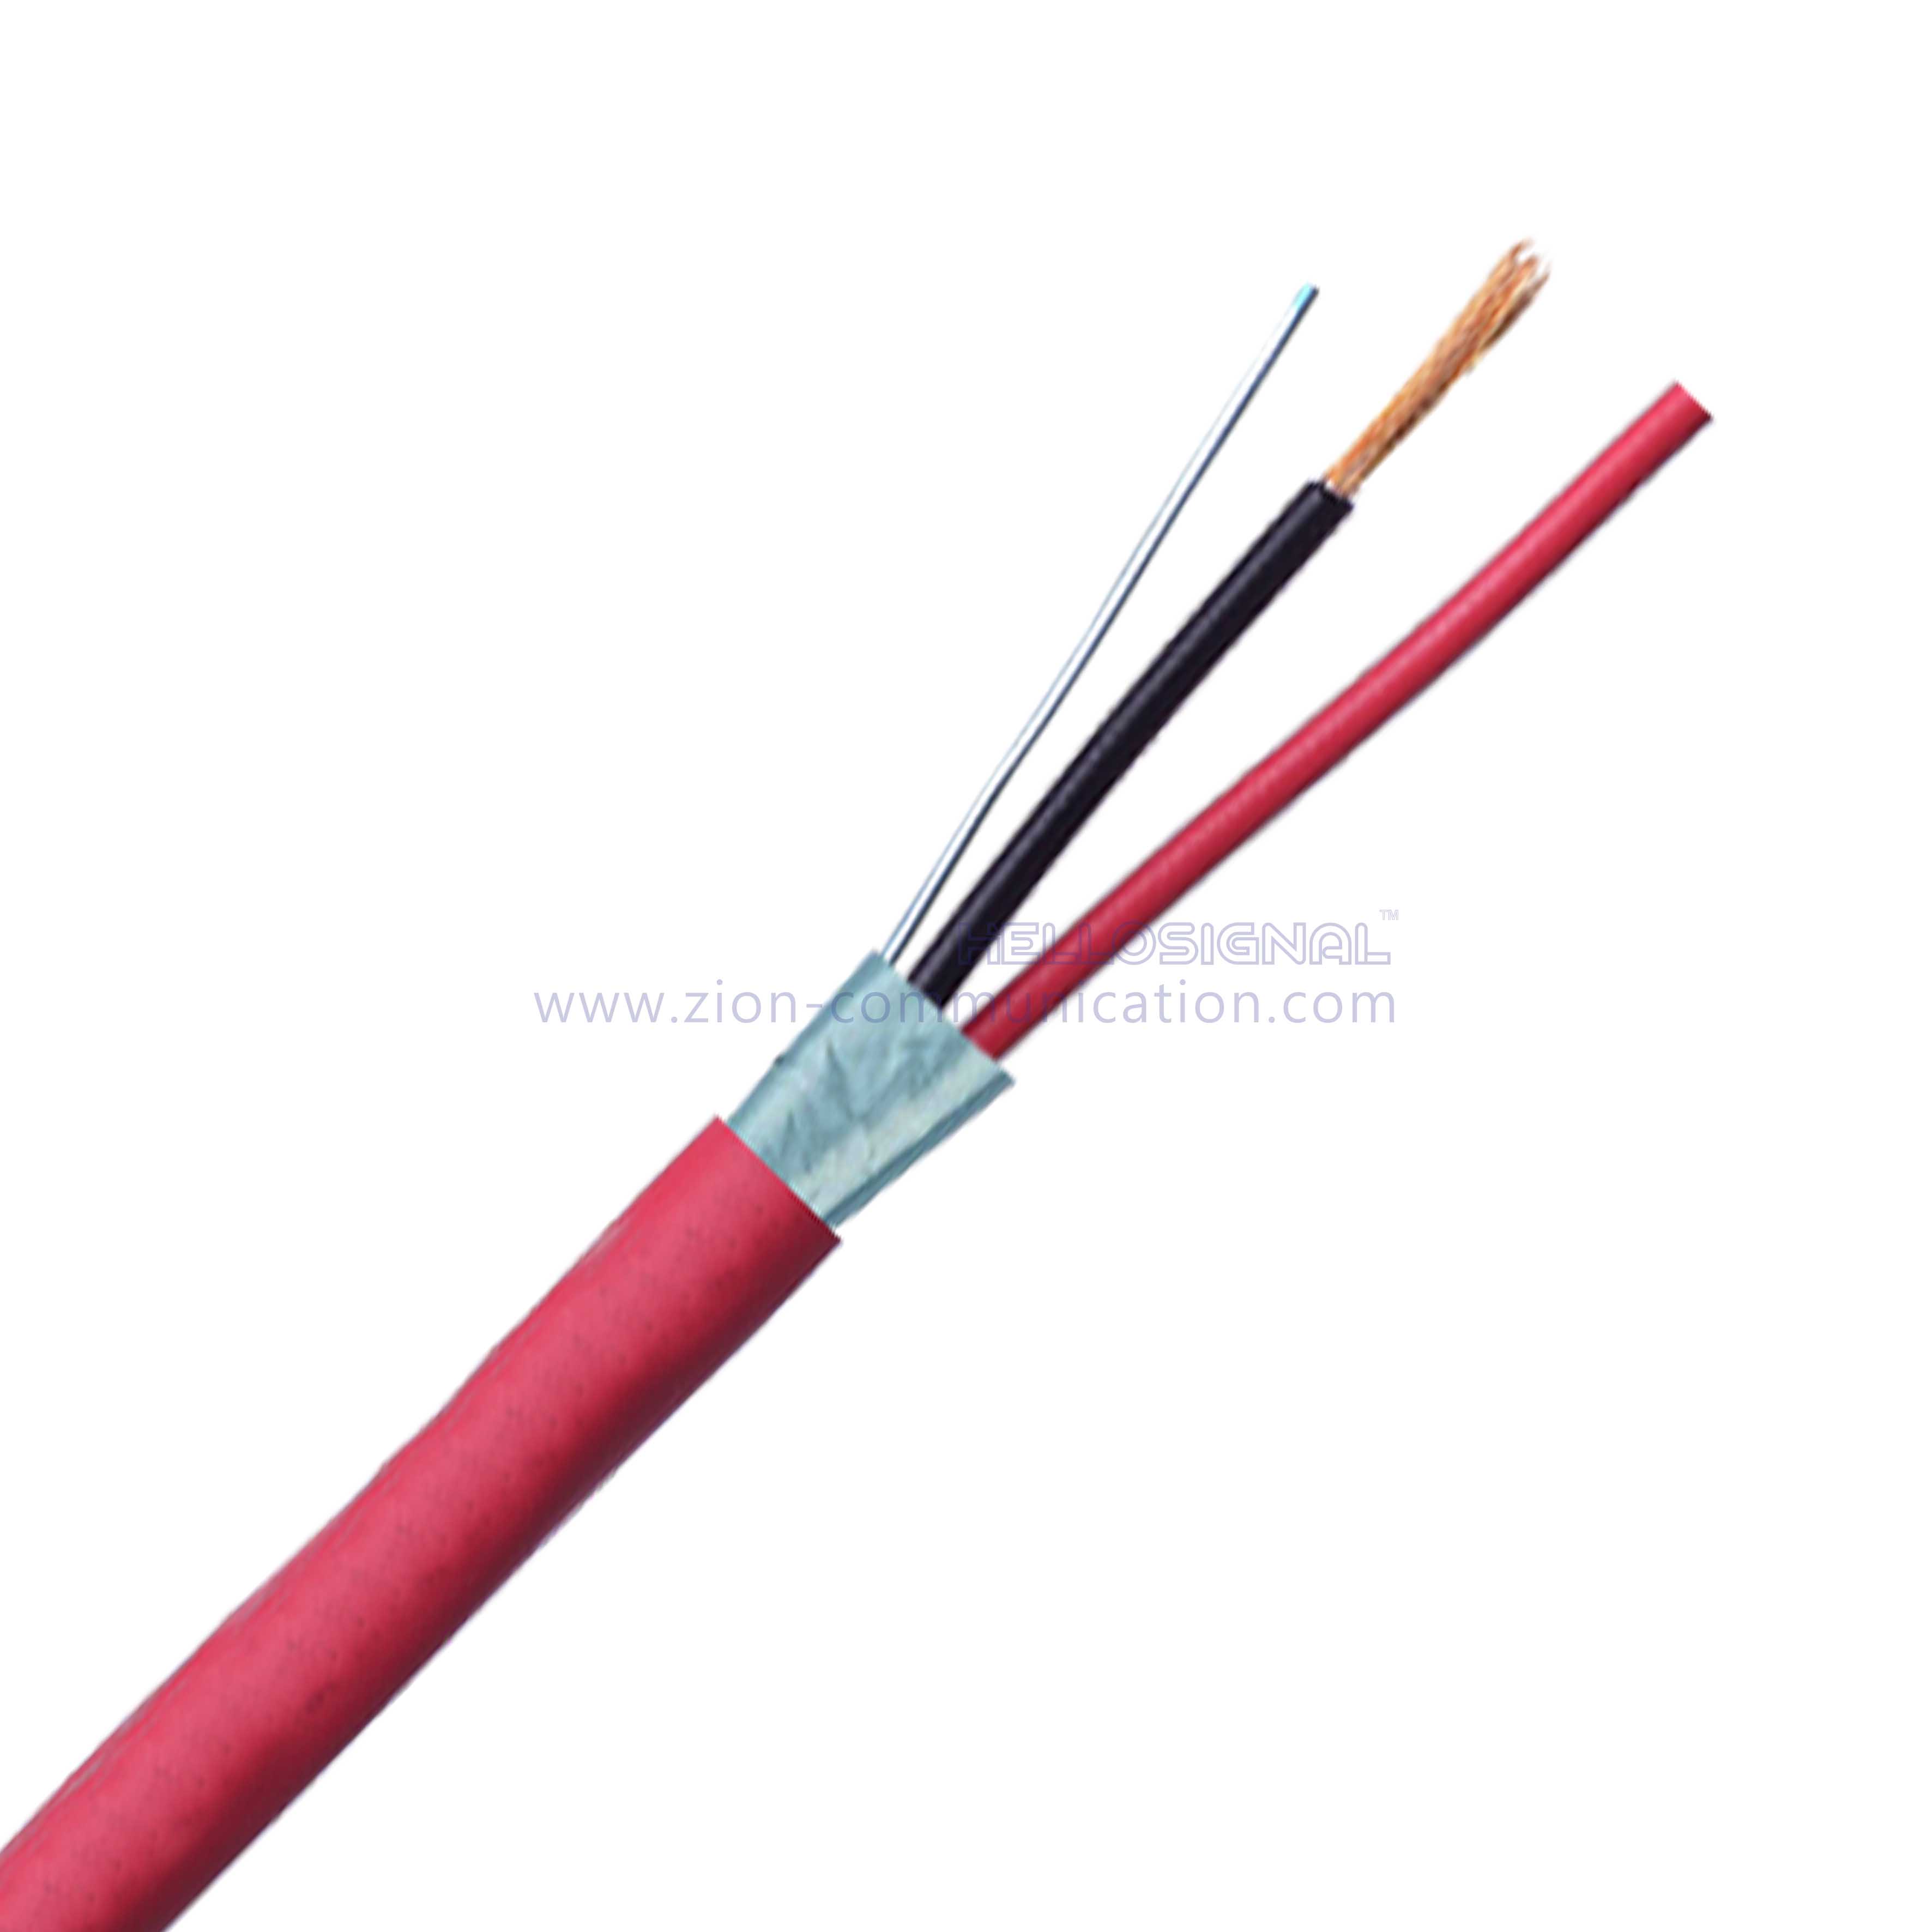 NO.7110310 12AWG 2/C STR Shielded FPL-CL2 Fire Alarm Cables